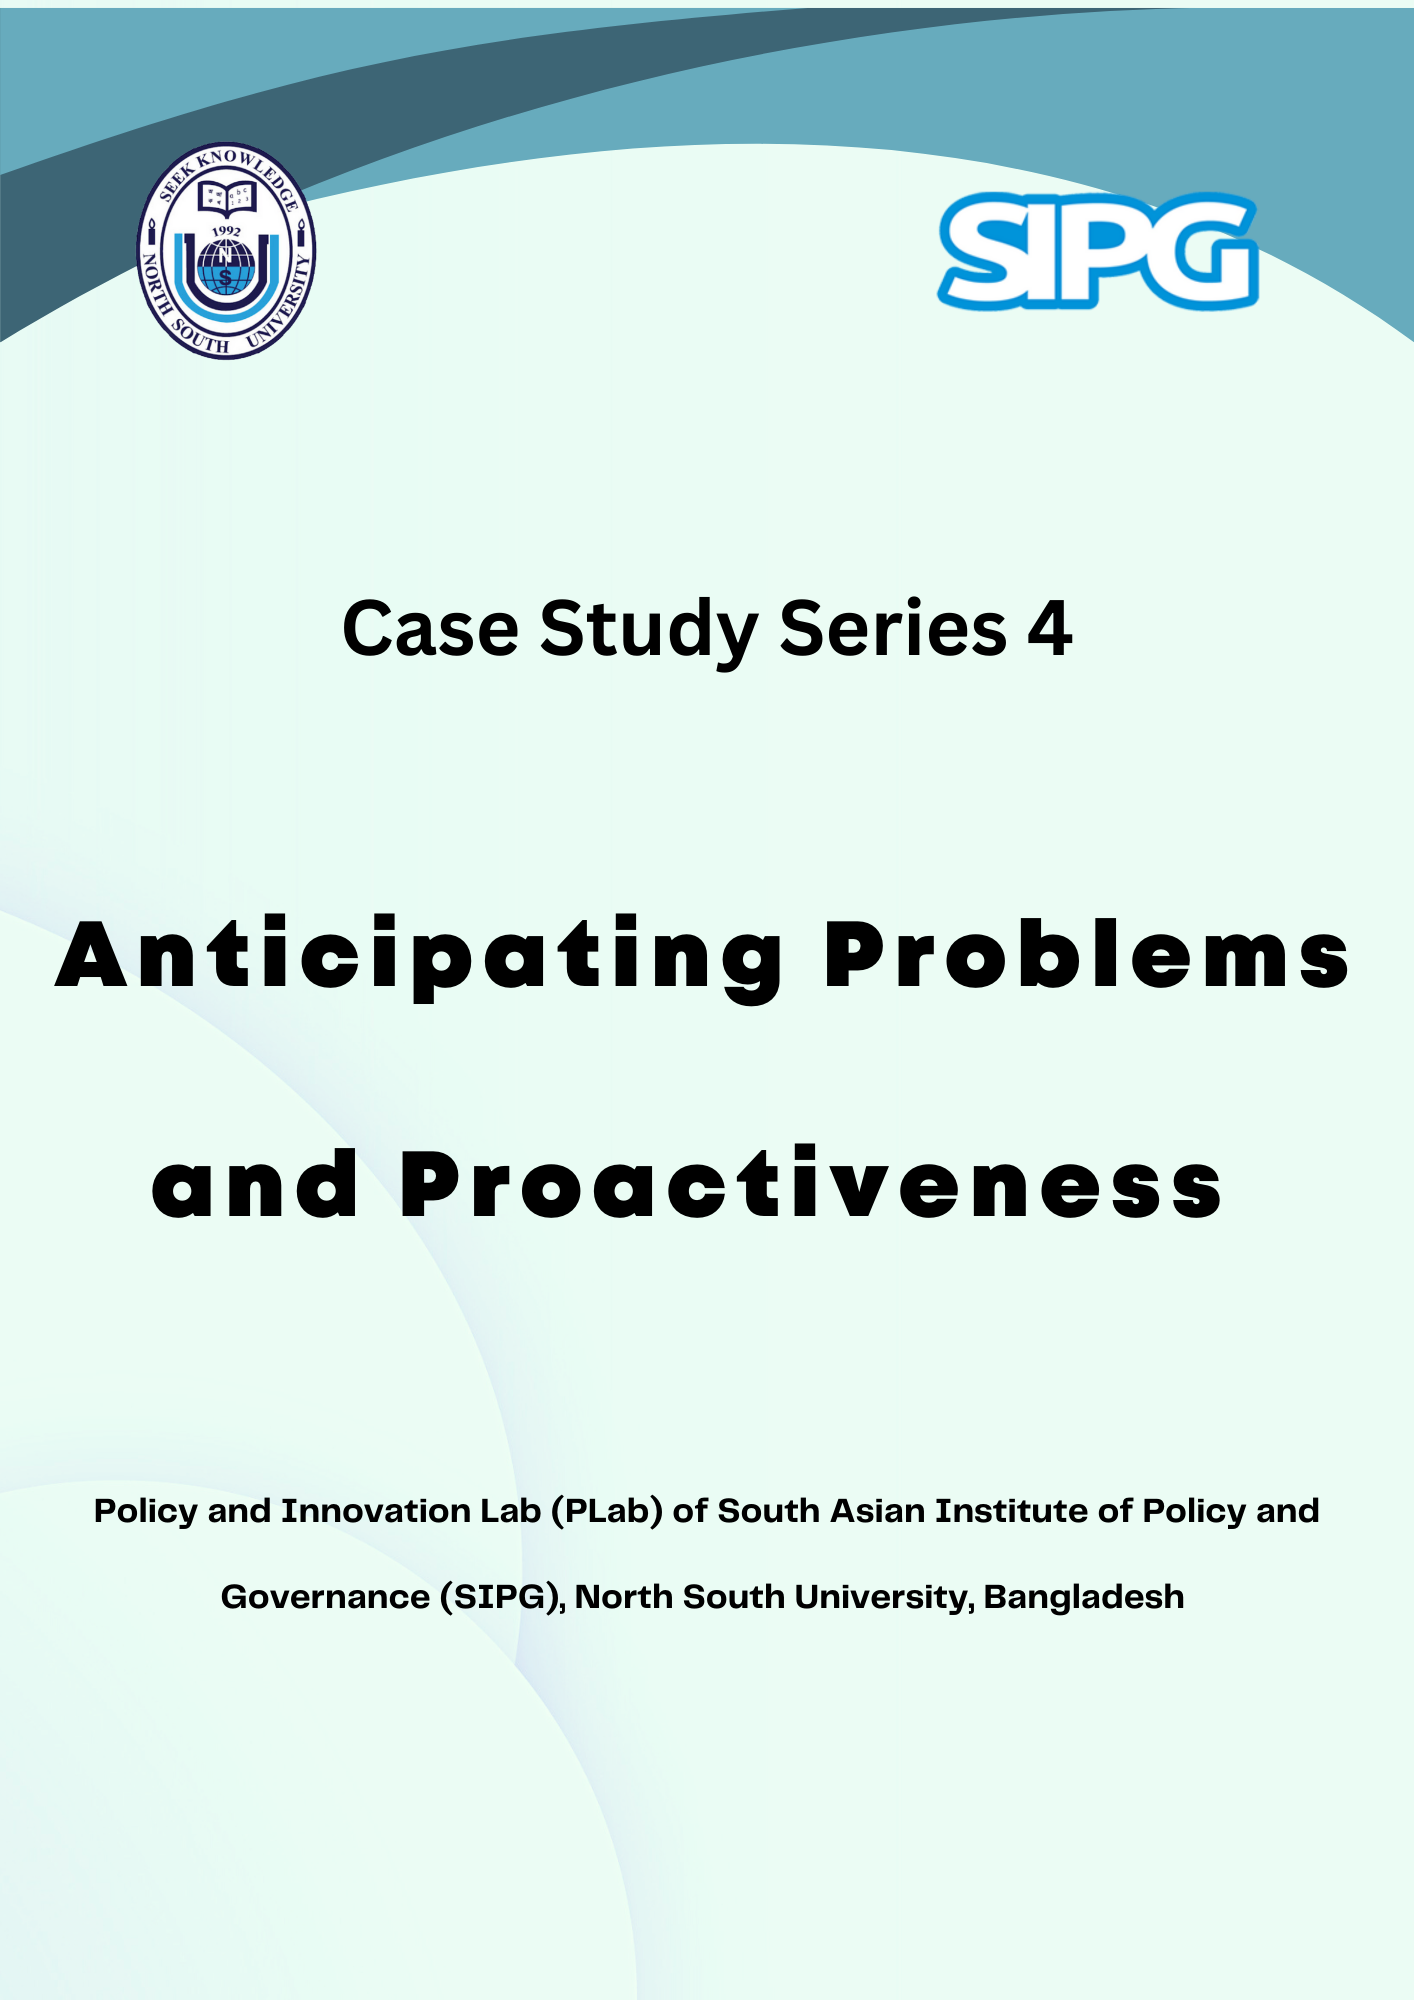 SIPG Case Study Series 4: Anticipating Problem and Proactiveness